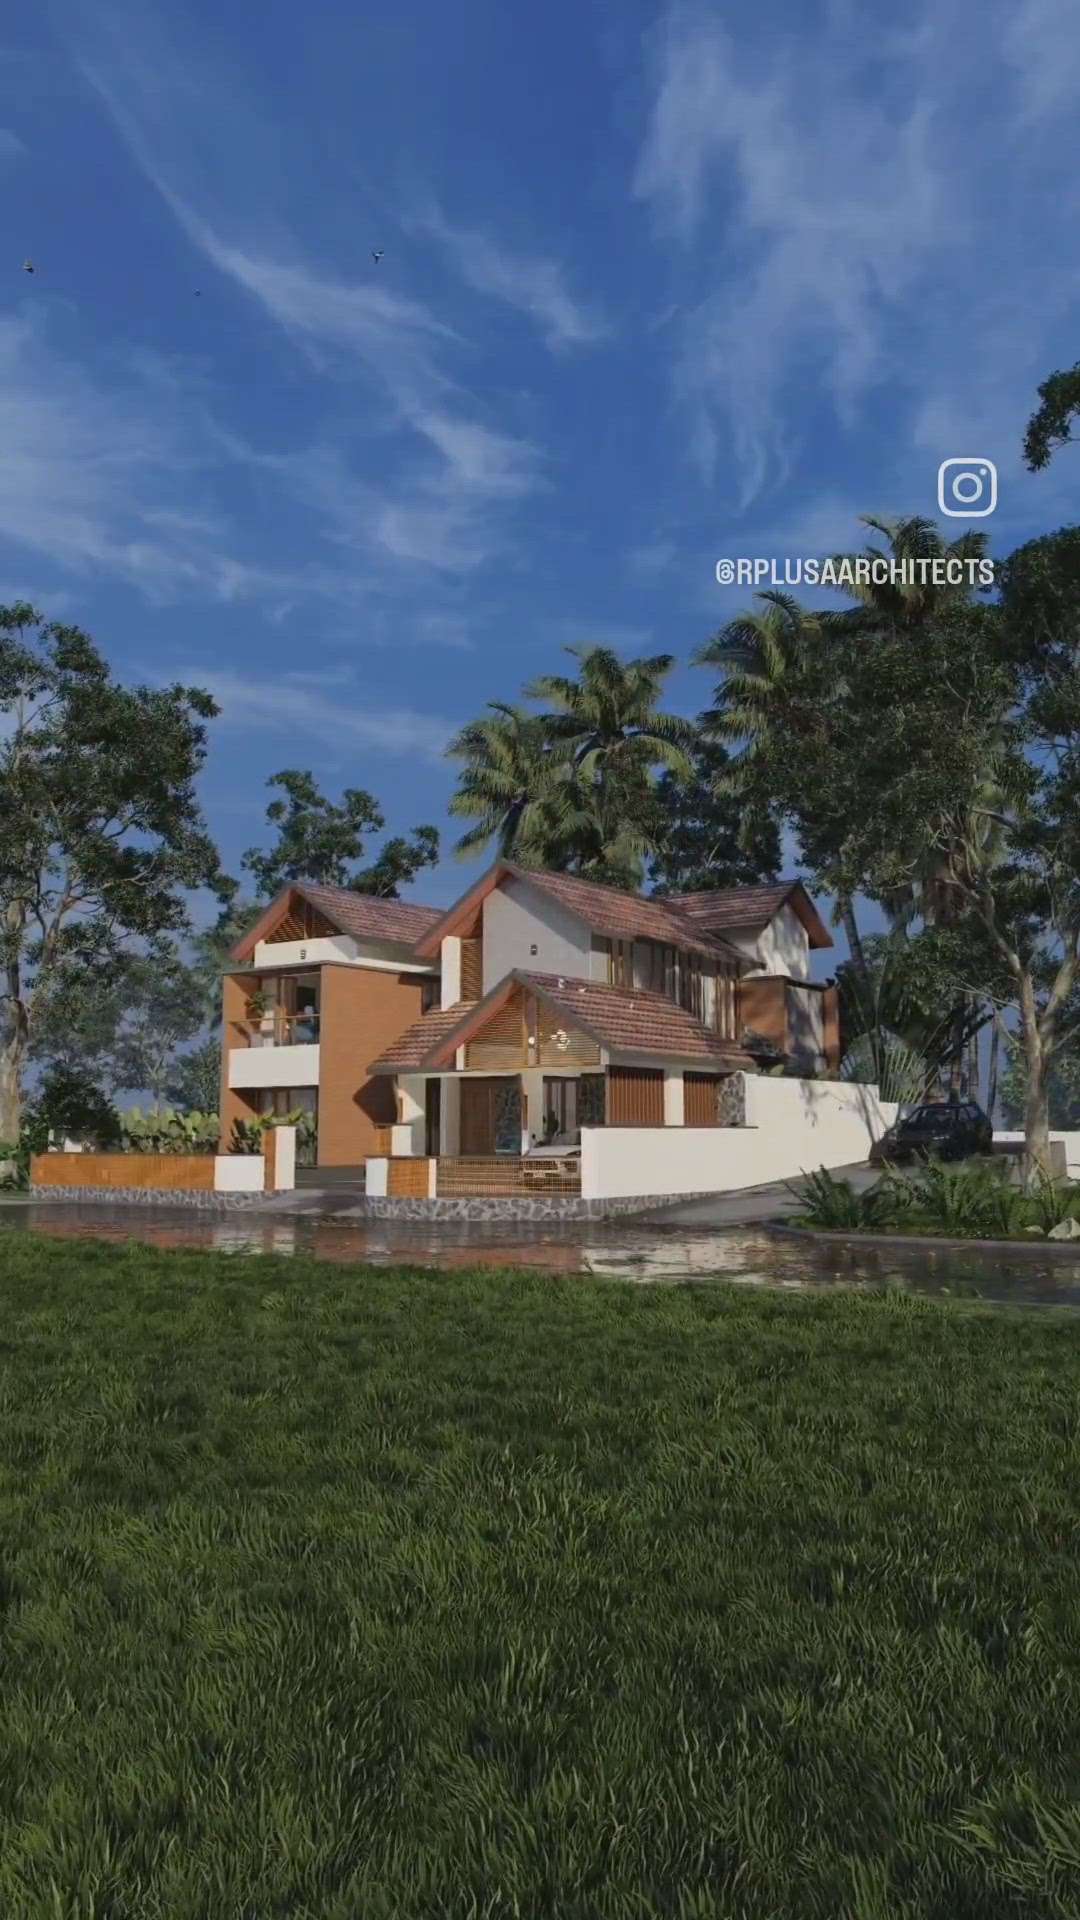 Architectural Exterior design for Residence  of Mr.Nassar and Vaheeda 
. 
Location : Wayanad 
. 
. 
.
For more details contact : +91-8075000381,8592803769
. 
. 
. 
. 
. 
. 
. 
. 
. 
. 
. 
. 
. 
#keralahomes #kerala #architecture #keralahomedesign #interiordesign #homedecor #home #homesweethome #interior #keralaarchitecture #interiordesigner #homedesign #keralahomeplanners #homedesignideas #homedecoration #keralainteriordesign #homes #architect #archdaily #bestarchitectsinperinthalmanna #homestyling #traditional #keralahome #freekeralahomeplans #homeplans #keralahouse #exteriordesign #architecturedesign #architecture_hunter #godsowncountry  #bestarchitectsinperinthalmanna #bestarchitectsinmalappuram #bestarchitectsinpalakkad #toparchitectsinperinthalmanna